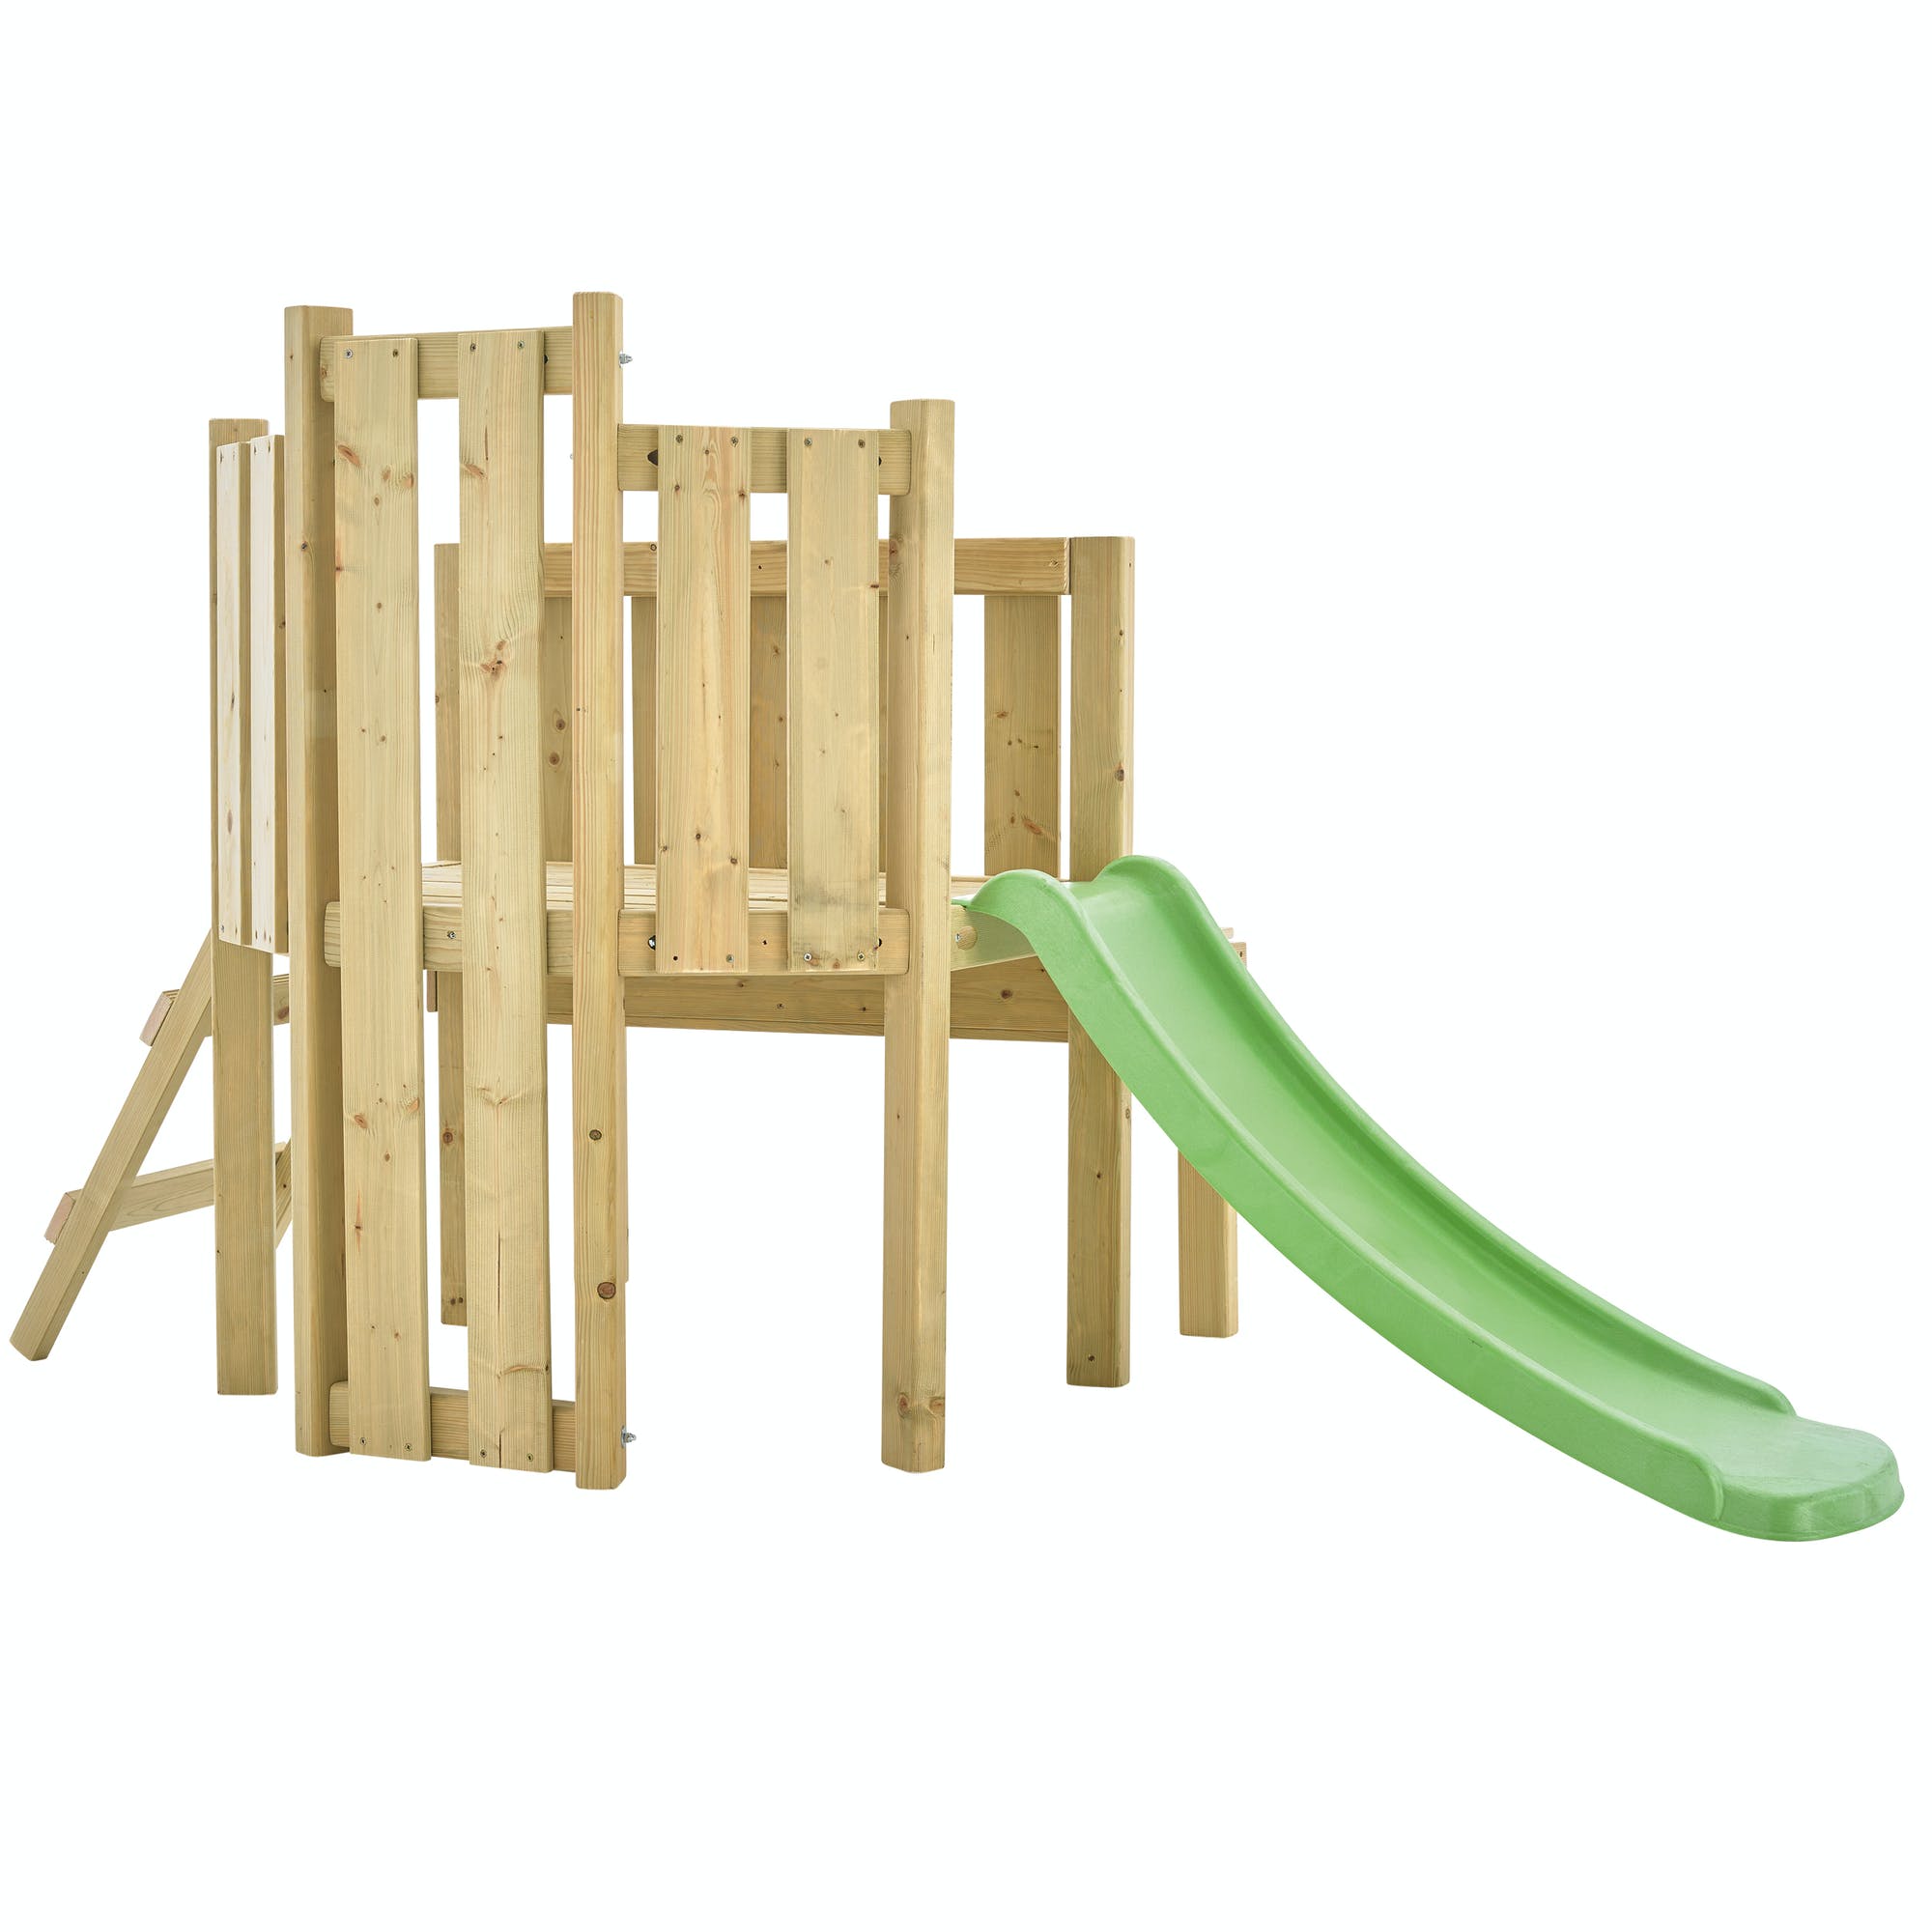 Early Fun Sandpit and Play Tower